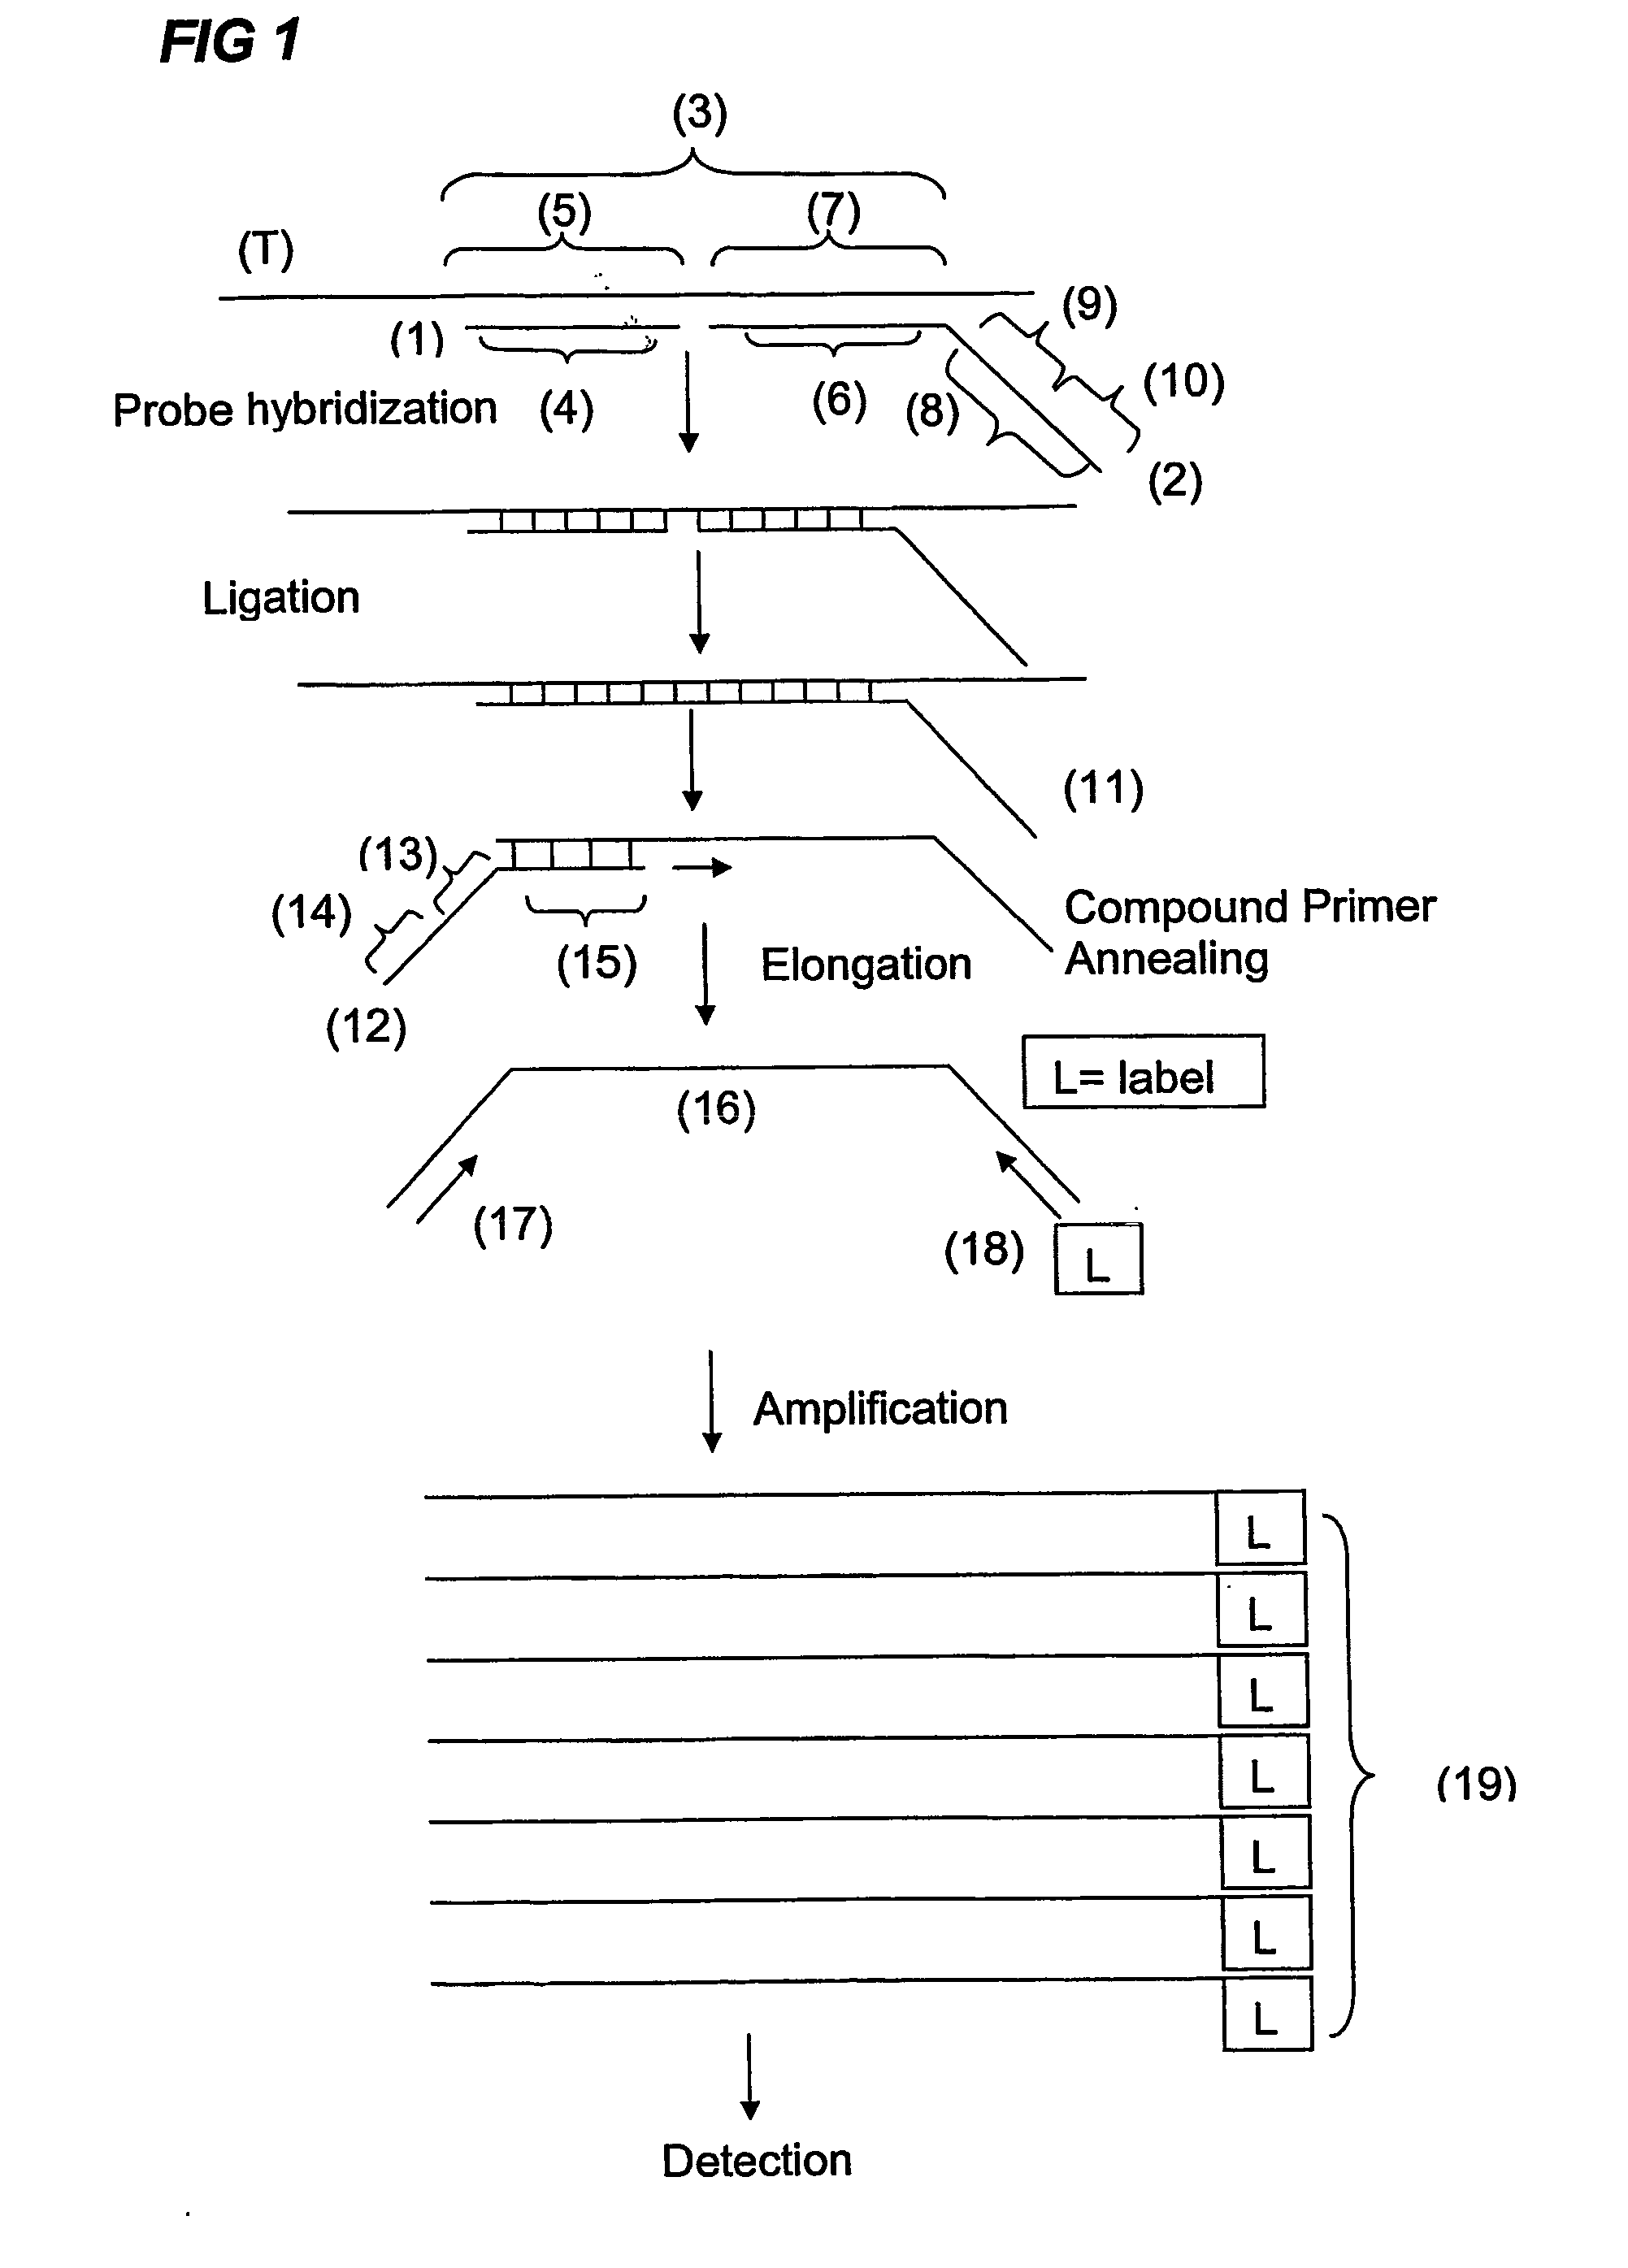 Ola-Based Methods for the Detection of Target Nucleic Avid Sequences